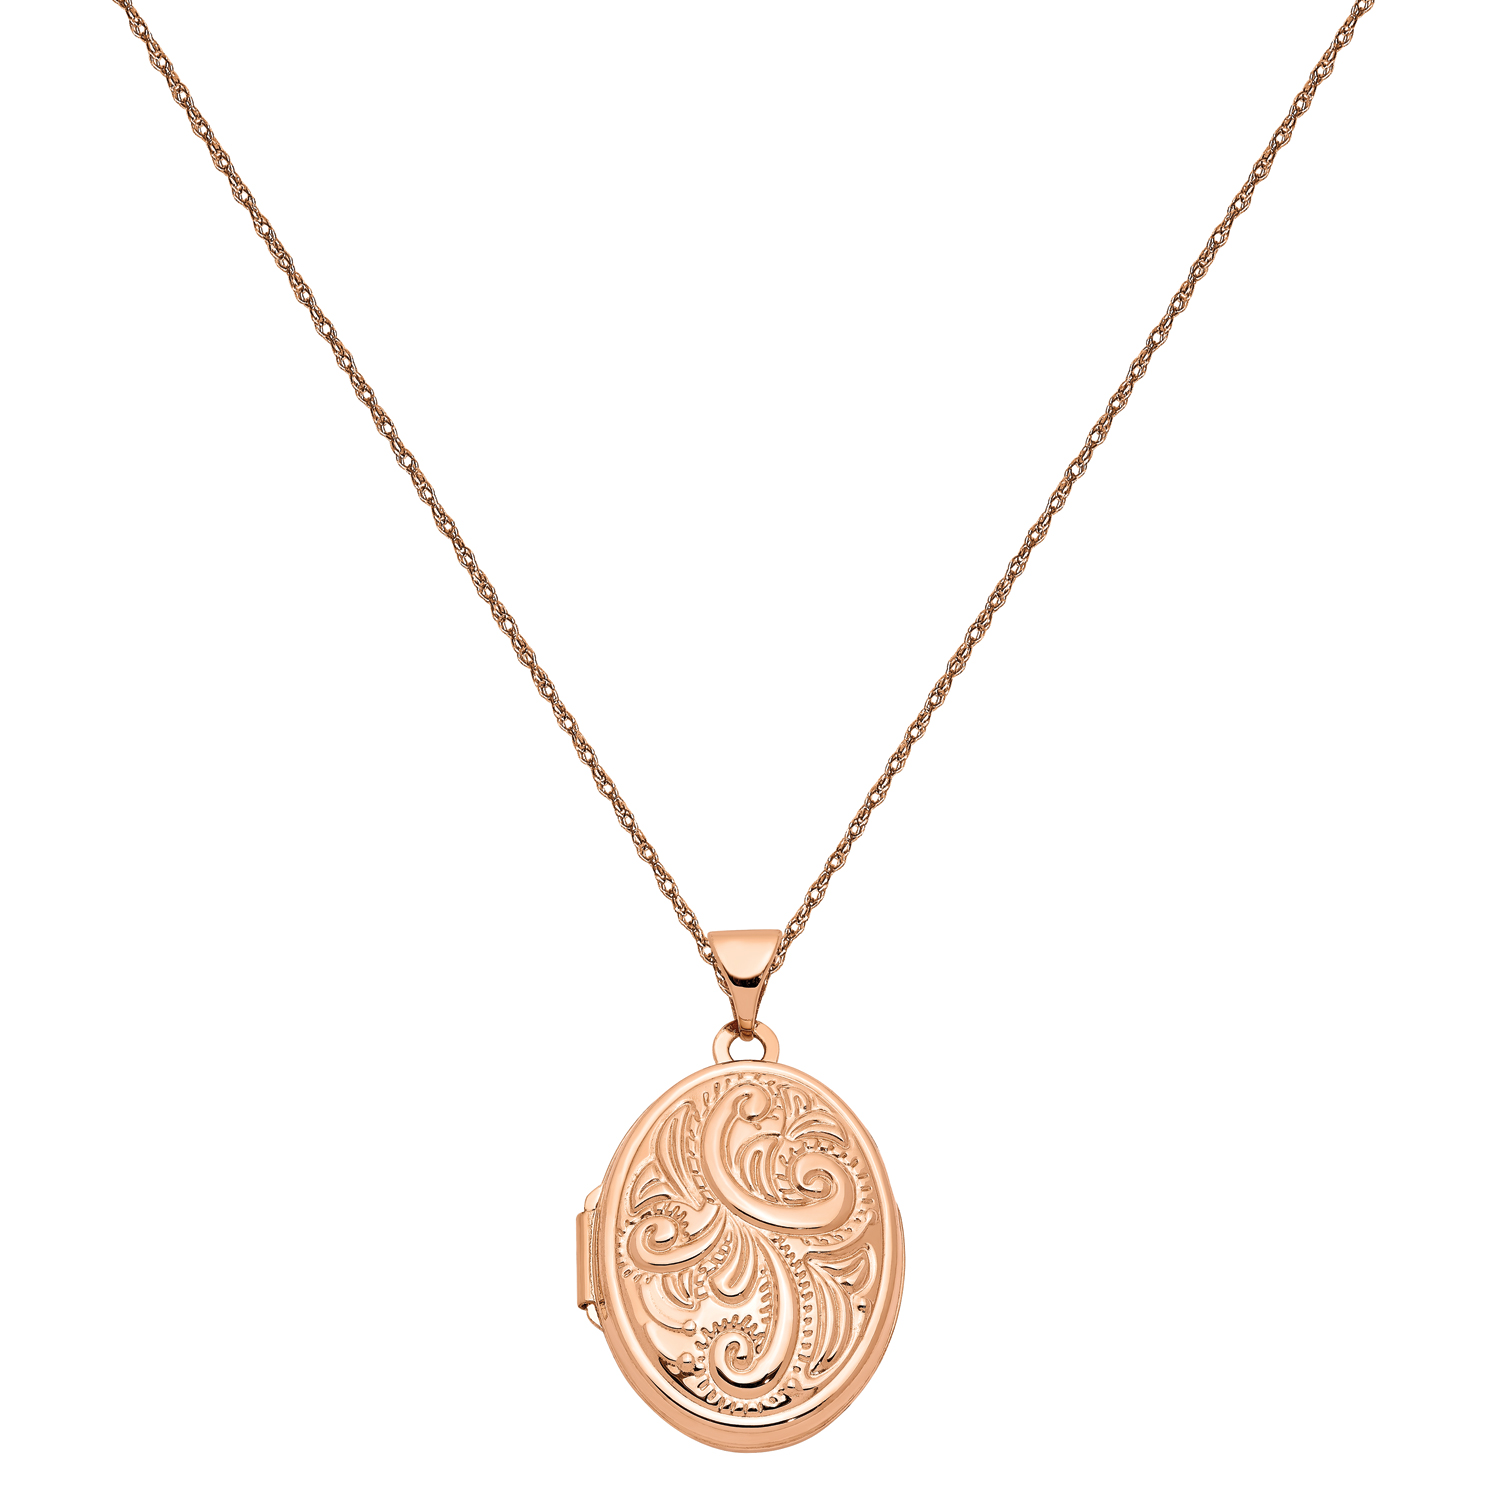 Primal Gold 14 Karat Rose Gold Domed Oval Locket with 18-inch Cable Rope Chain - image 1 of 4